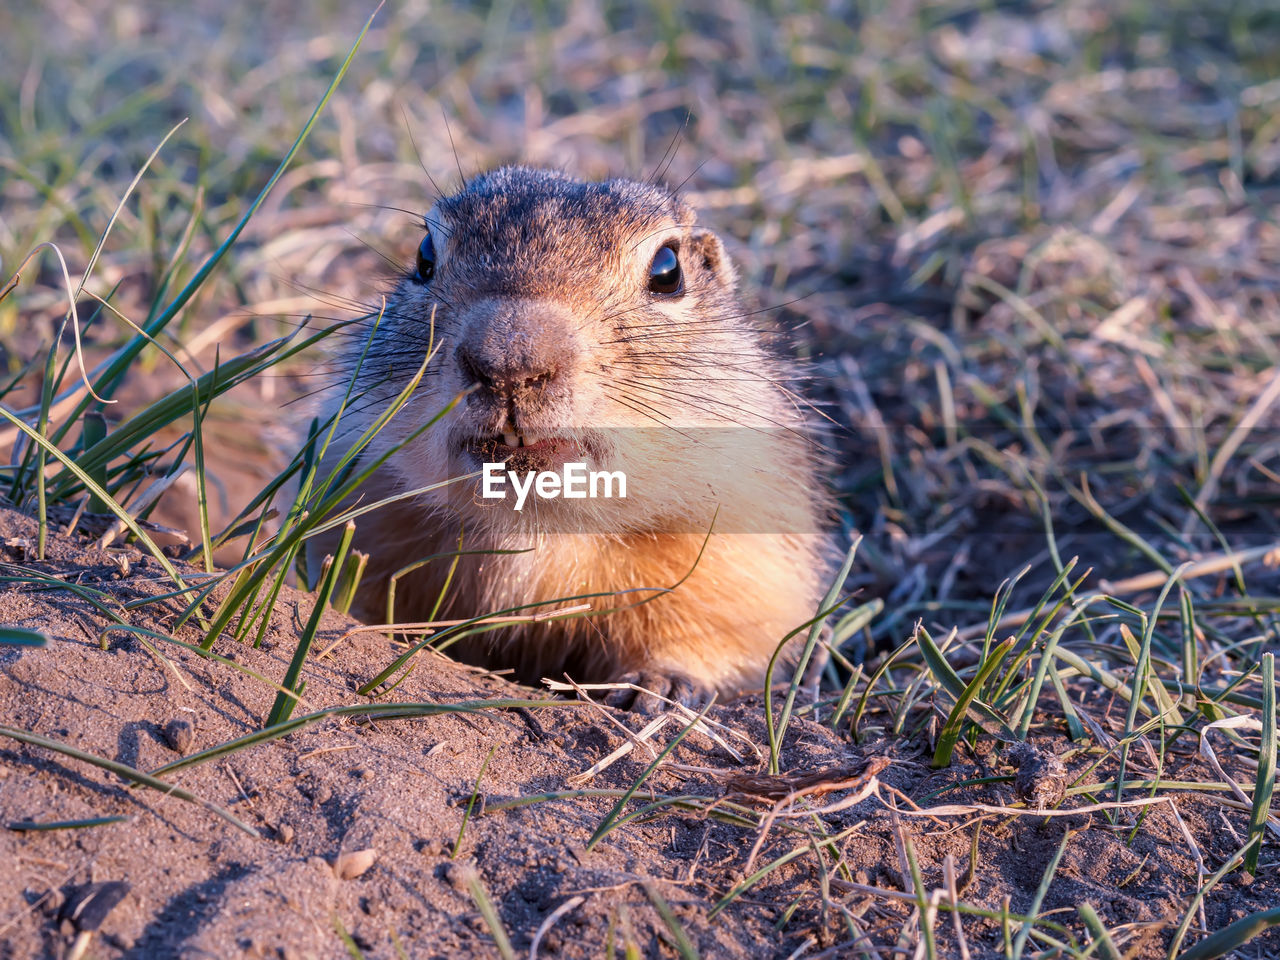 animal themes, animal, animal wildlife, one animal, nature, wildlife, mammal, rodent, whiskers, squirrel, no people, prairie dog, land, portrait, close-up, day, outdoors, plant, grass, eating, looking at camera, focus on foreground